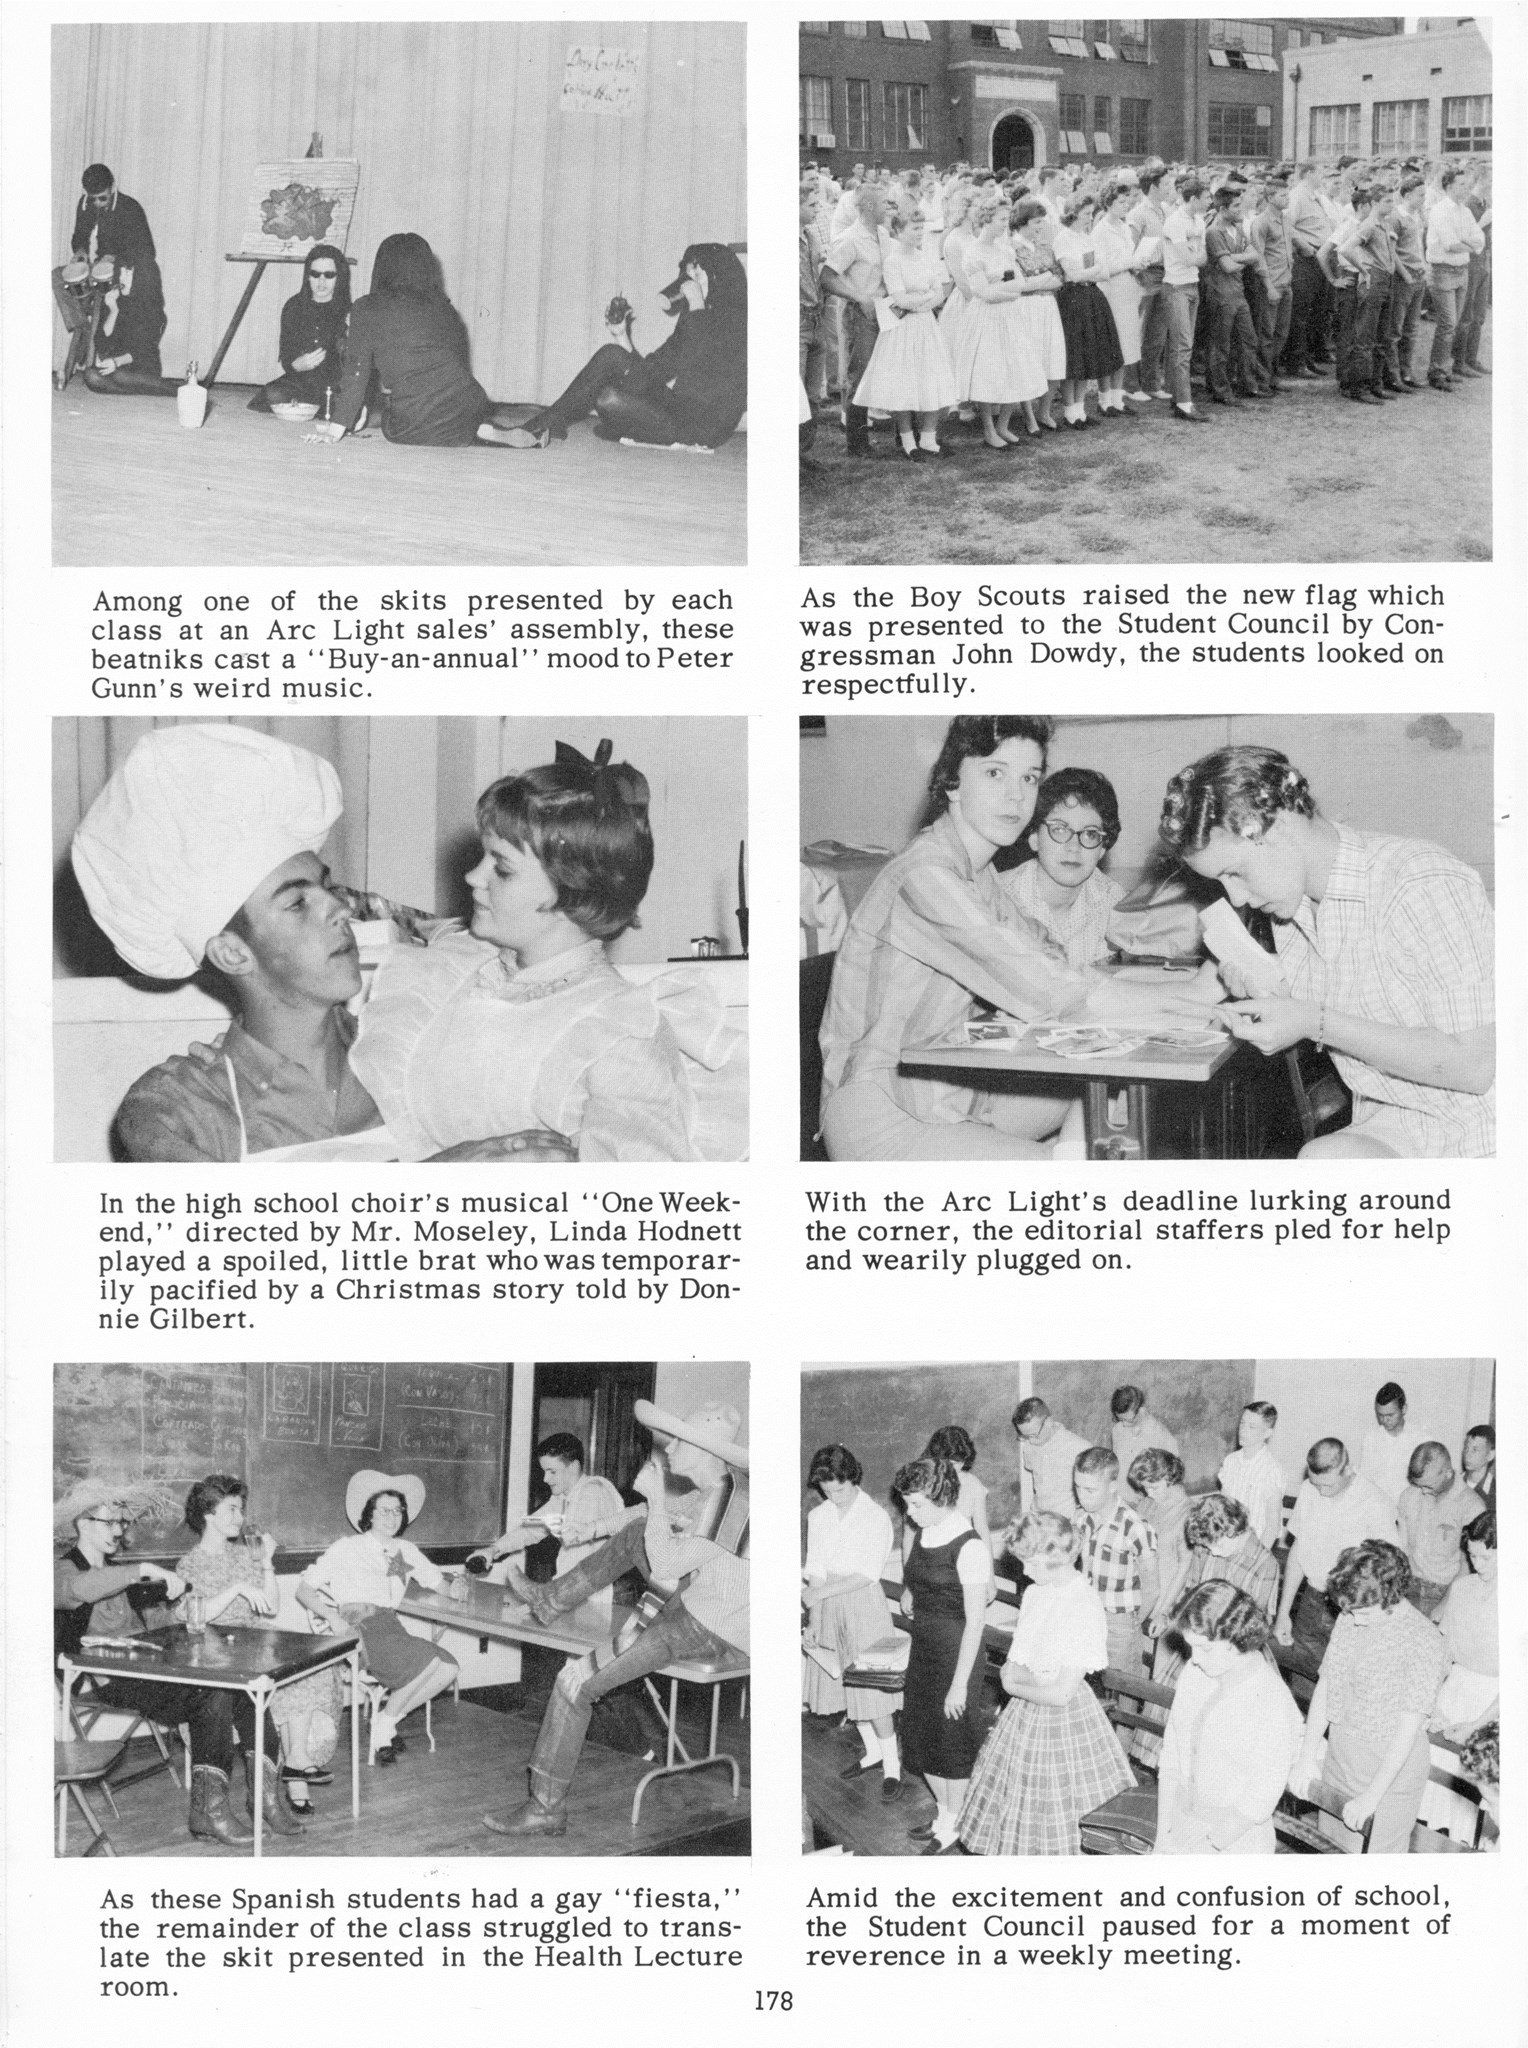 ../../../Images/Large/1960/Arclight-1960-pg0178.jpg